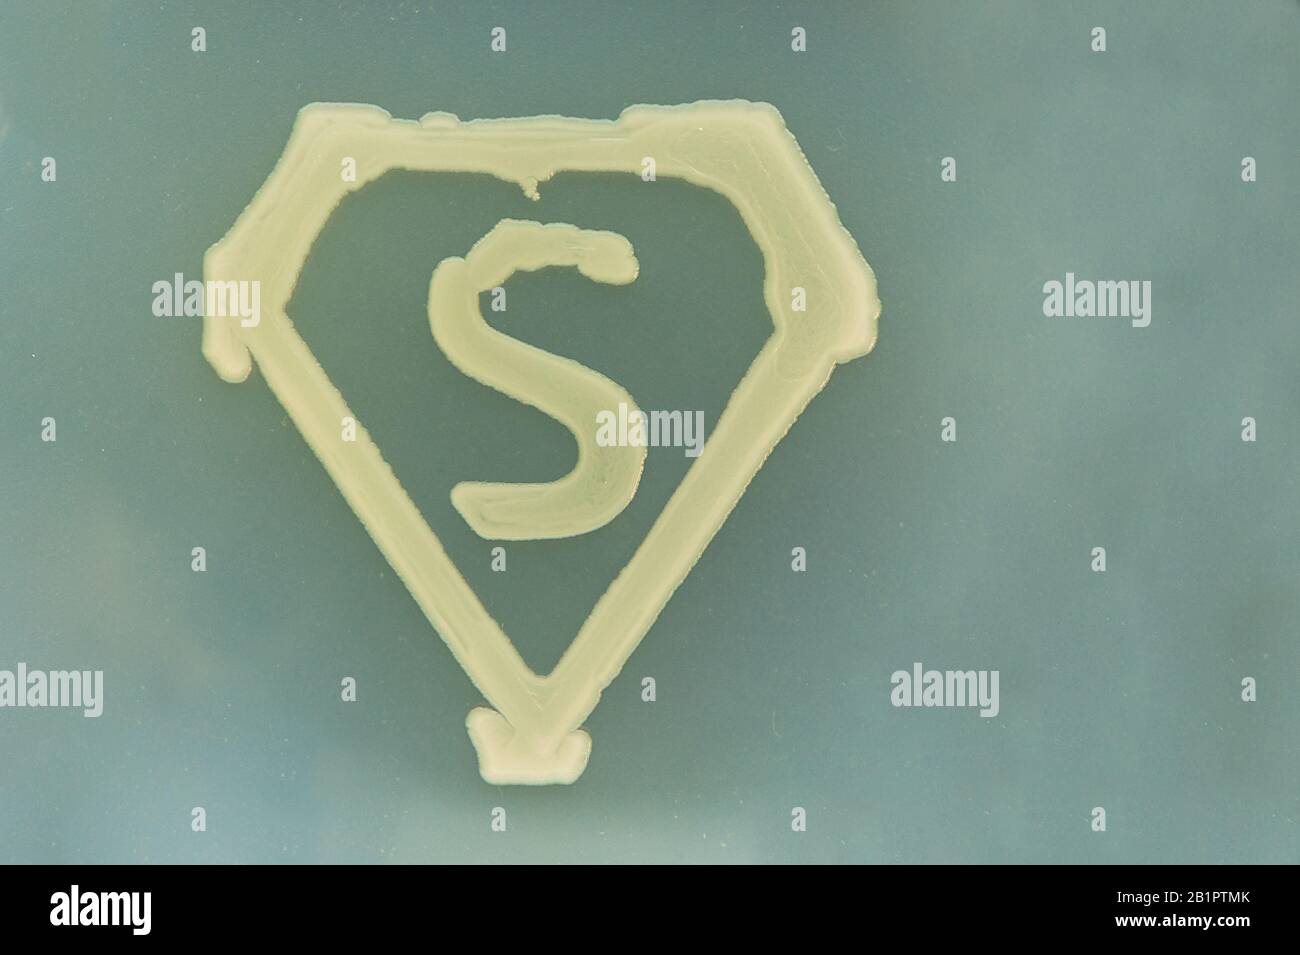 super germ sign made of bacterial culture in shape of letter s Stock Photo